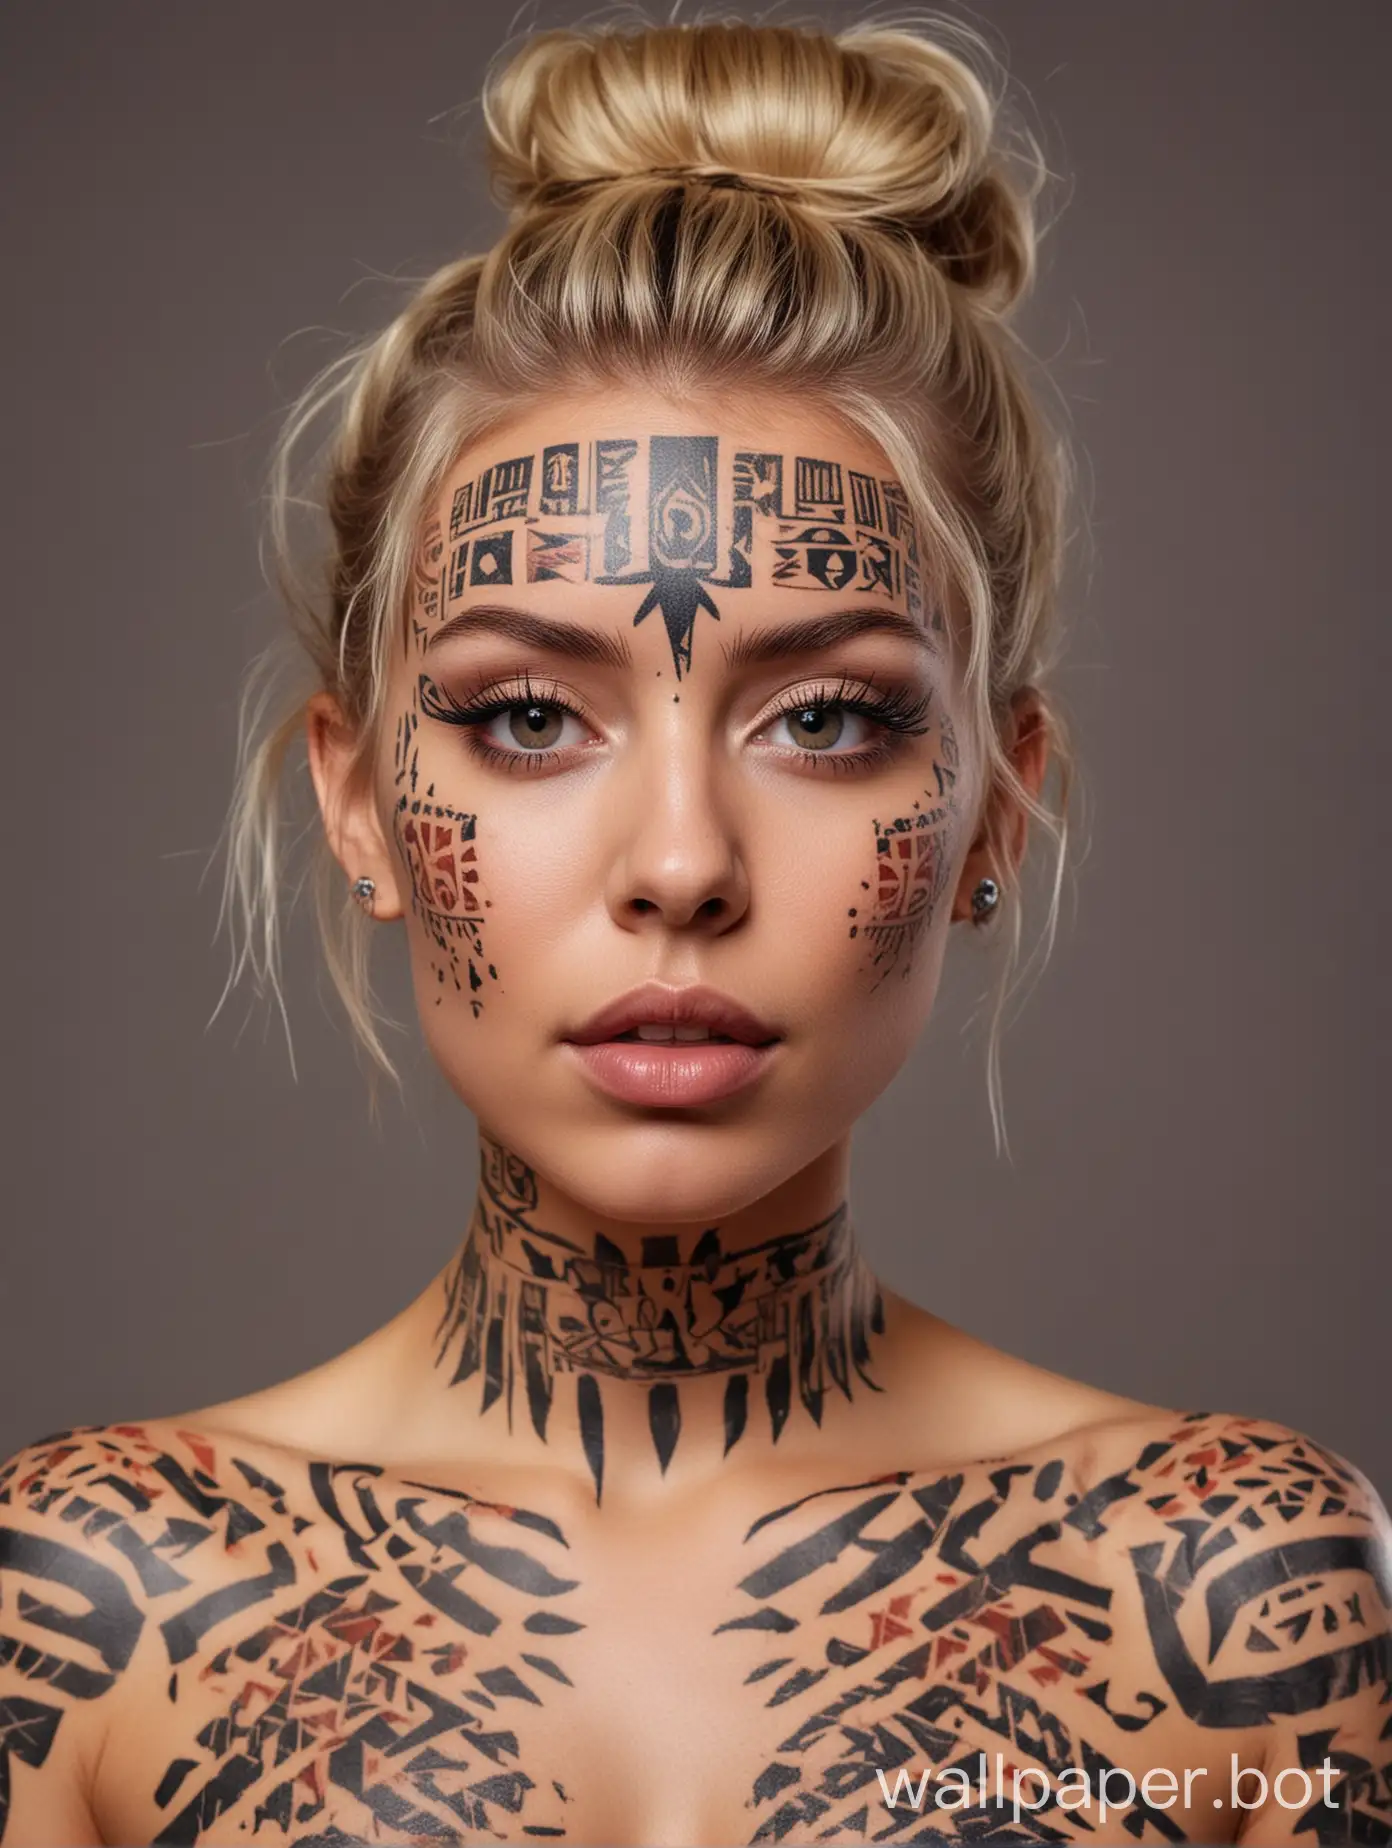 Captivating portrait of blonde woman naked her body covered with coloured tribal tattoos, messy bun hairstyle thick eyelashes, shy pose.